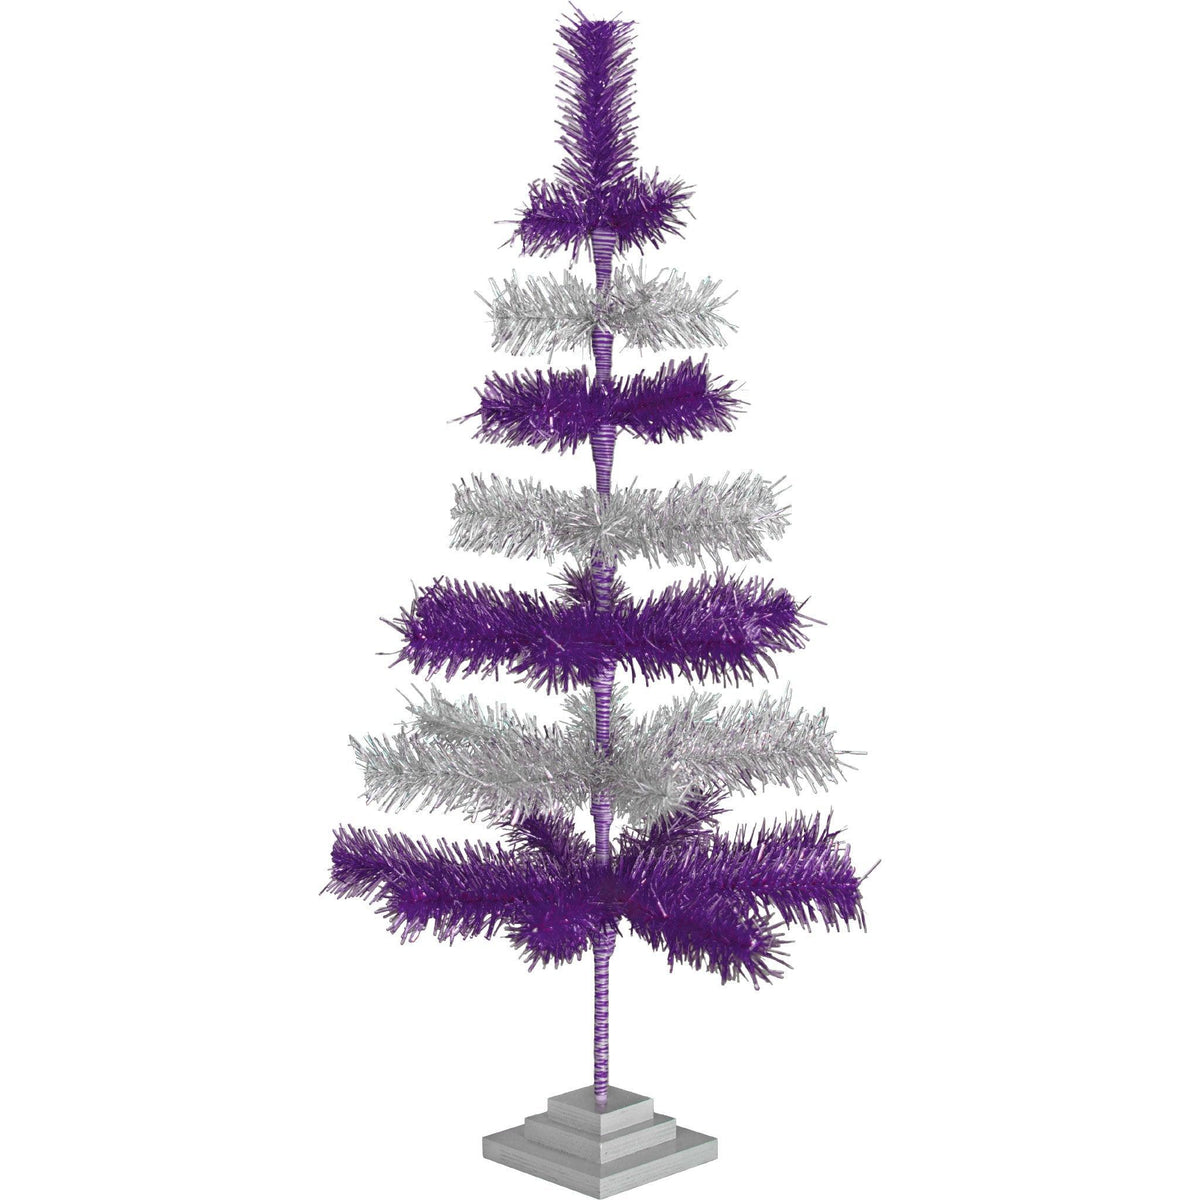 Purple & Silver Layered Tinsel Christmas Trees!    Decorate for the holidays with a Shiny Purple and Metallic Silver retro-style Christmas Tree.  On sale now at leedisplay.com